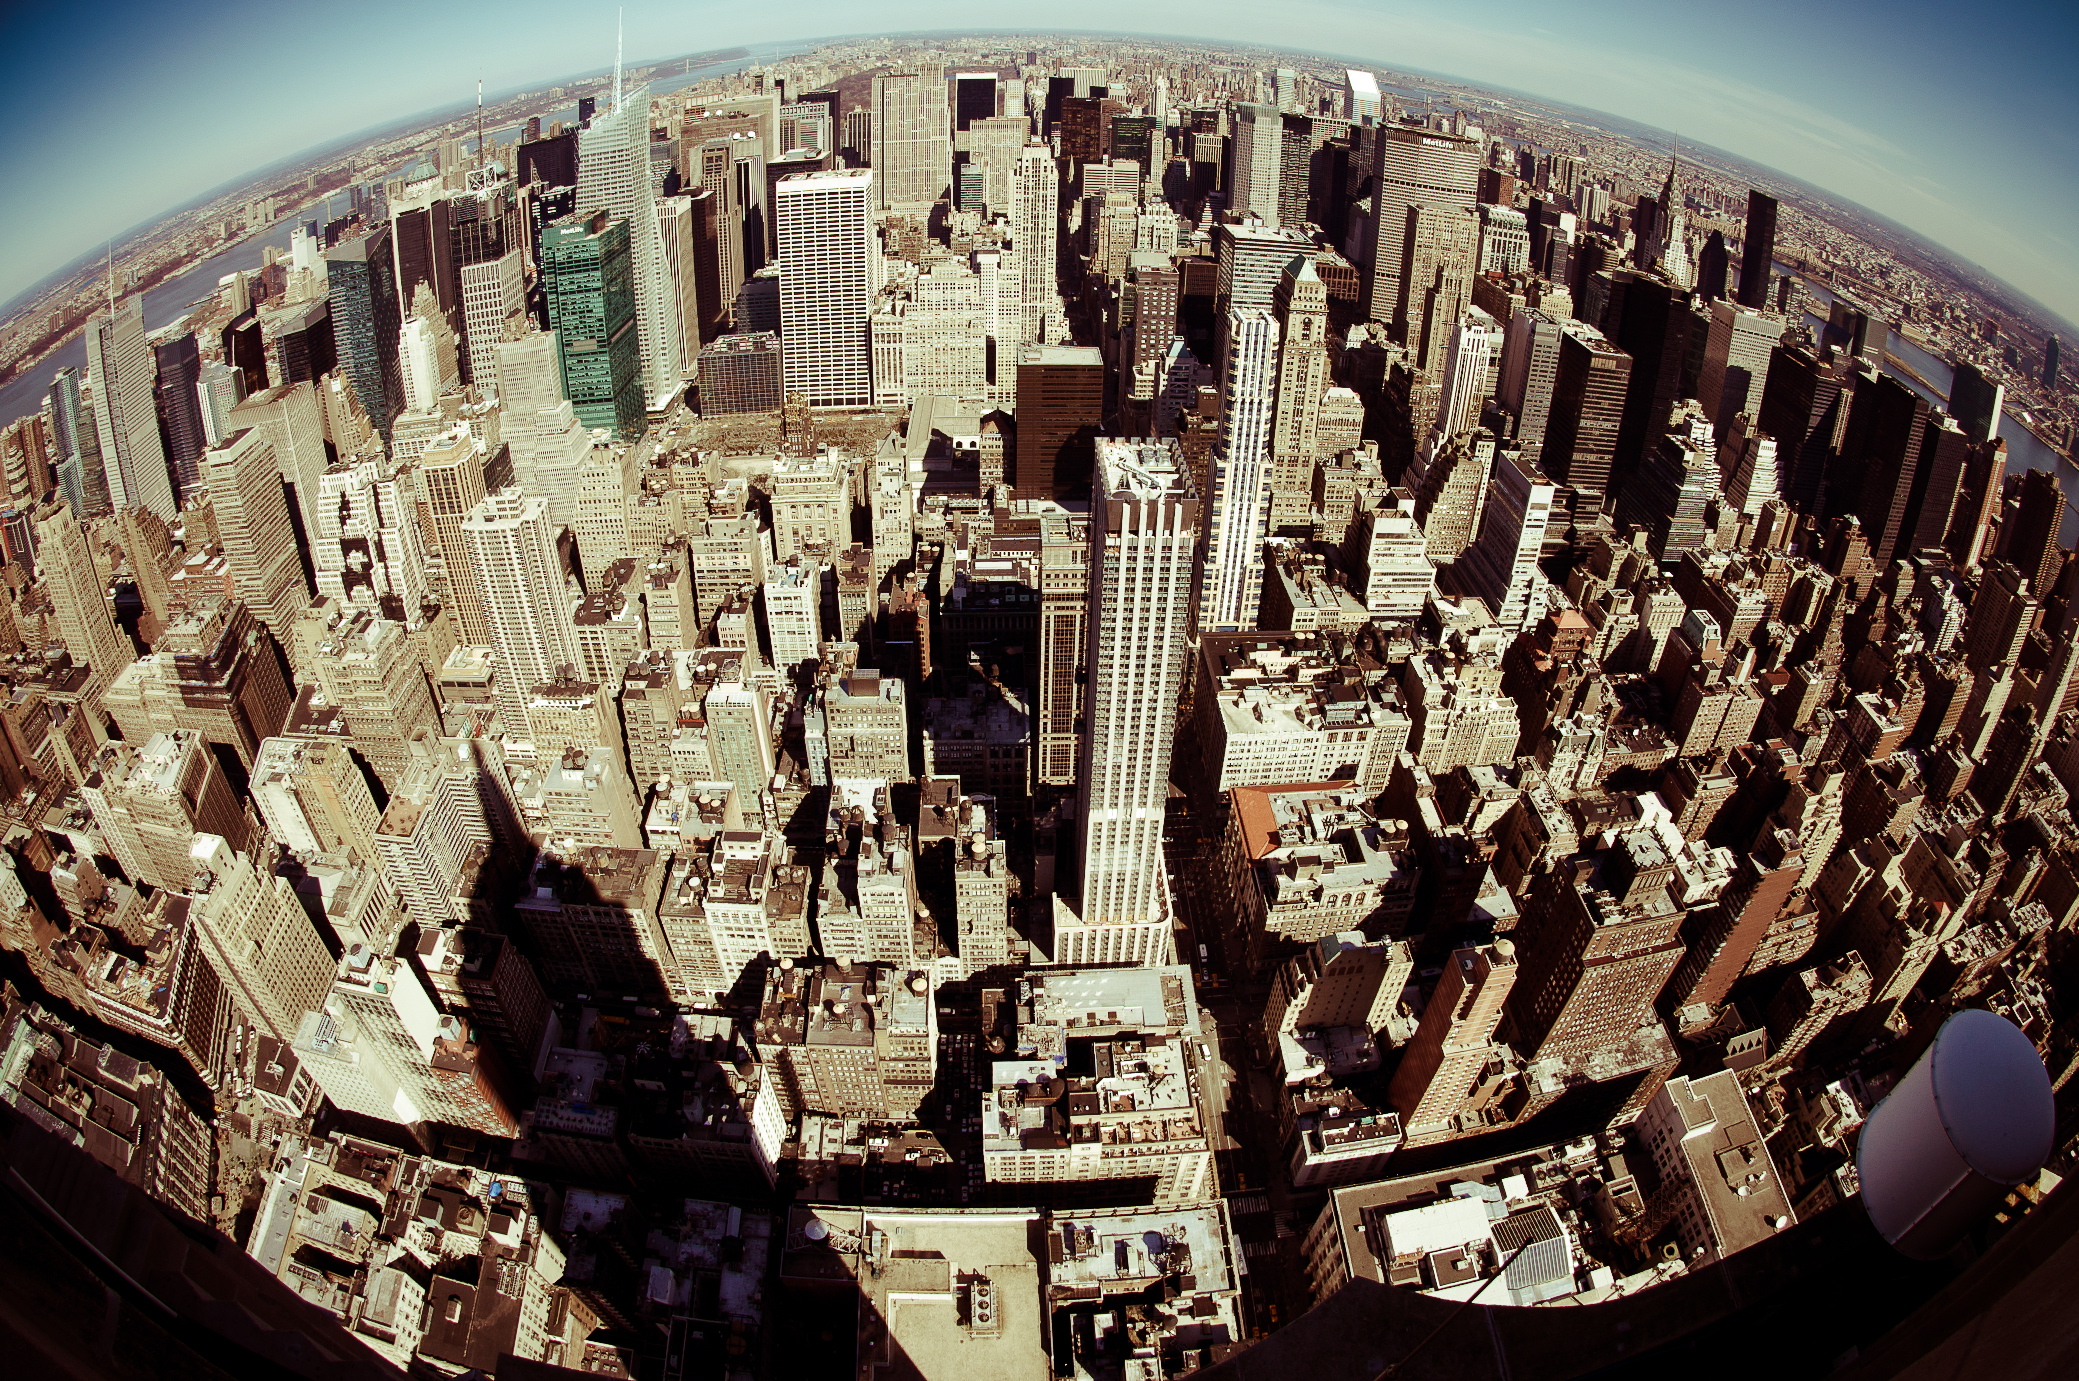 New York City from the Empire State building using a fisheye lens by Colin Bishop